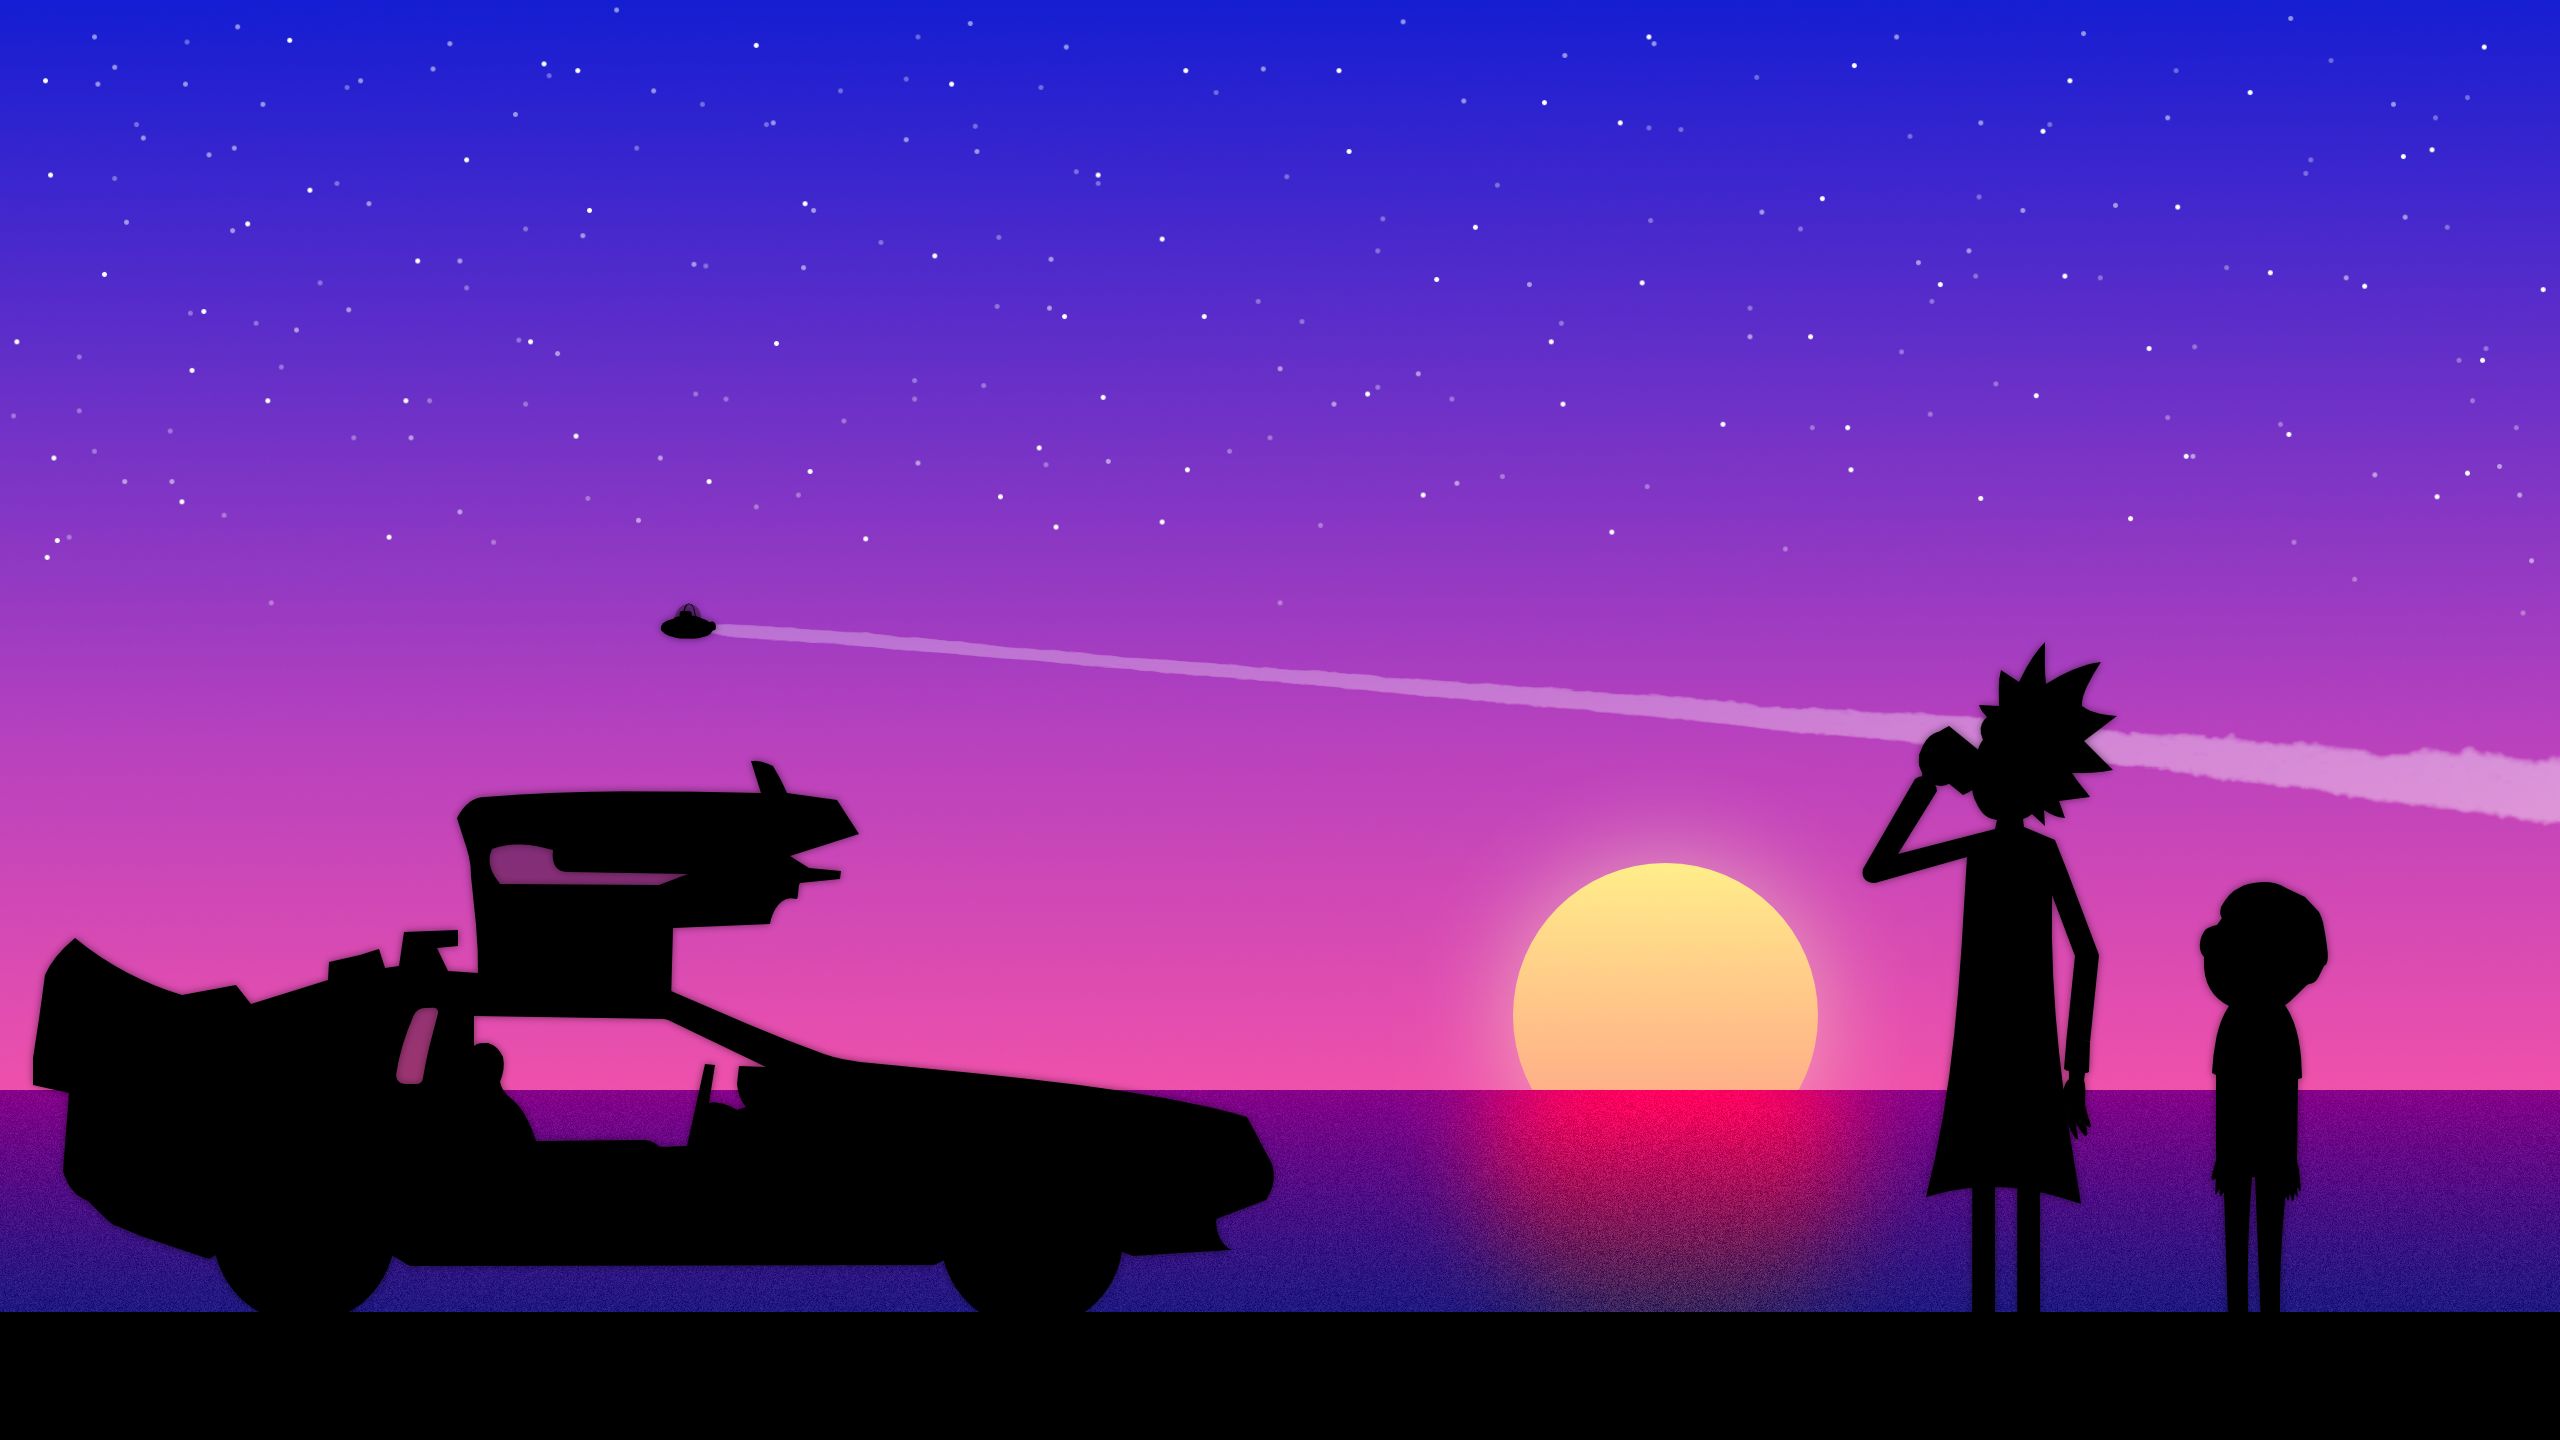 rick and morty, purple, sunset, car, tv show, morty smith, rick sanchez Full HD